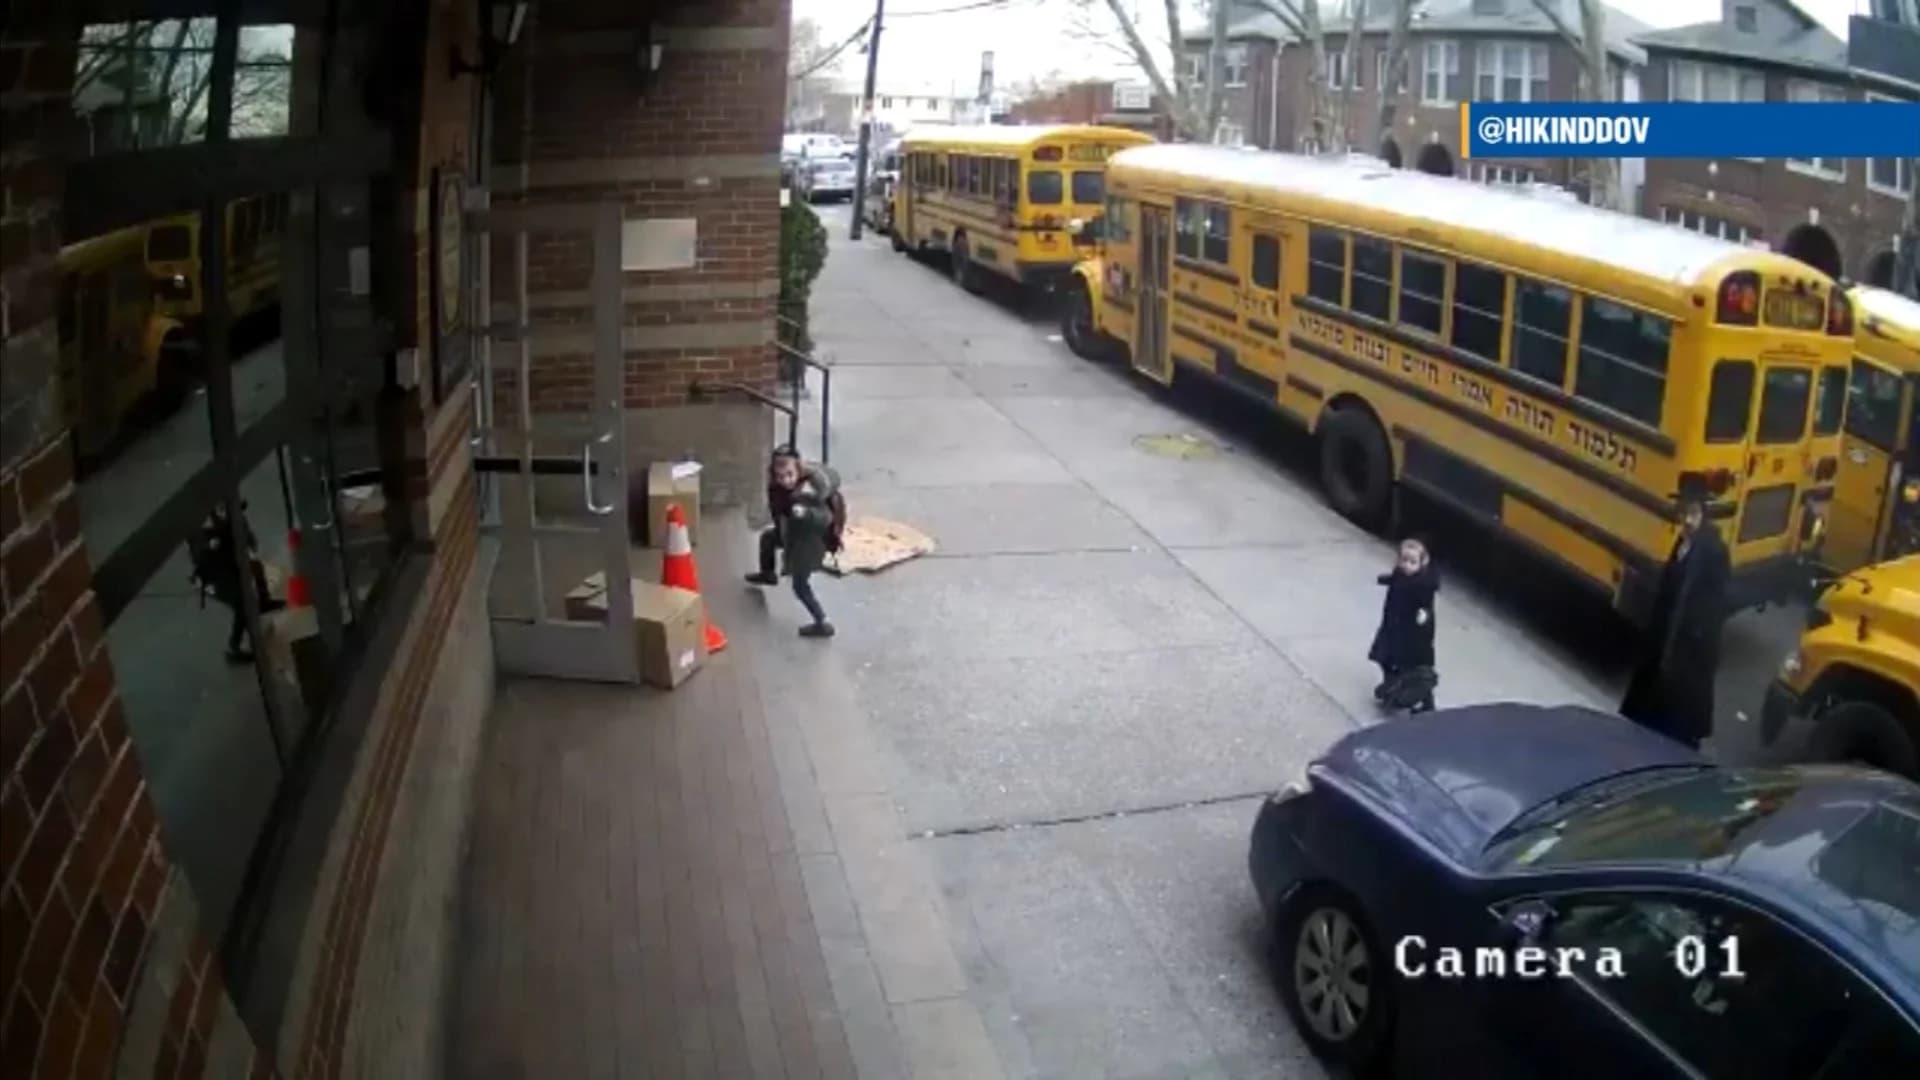 VIDEO: Driver hops curb to get around school buses; kids nearly struck